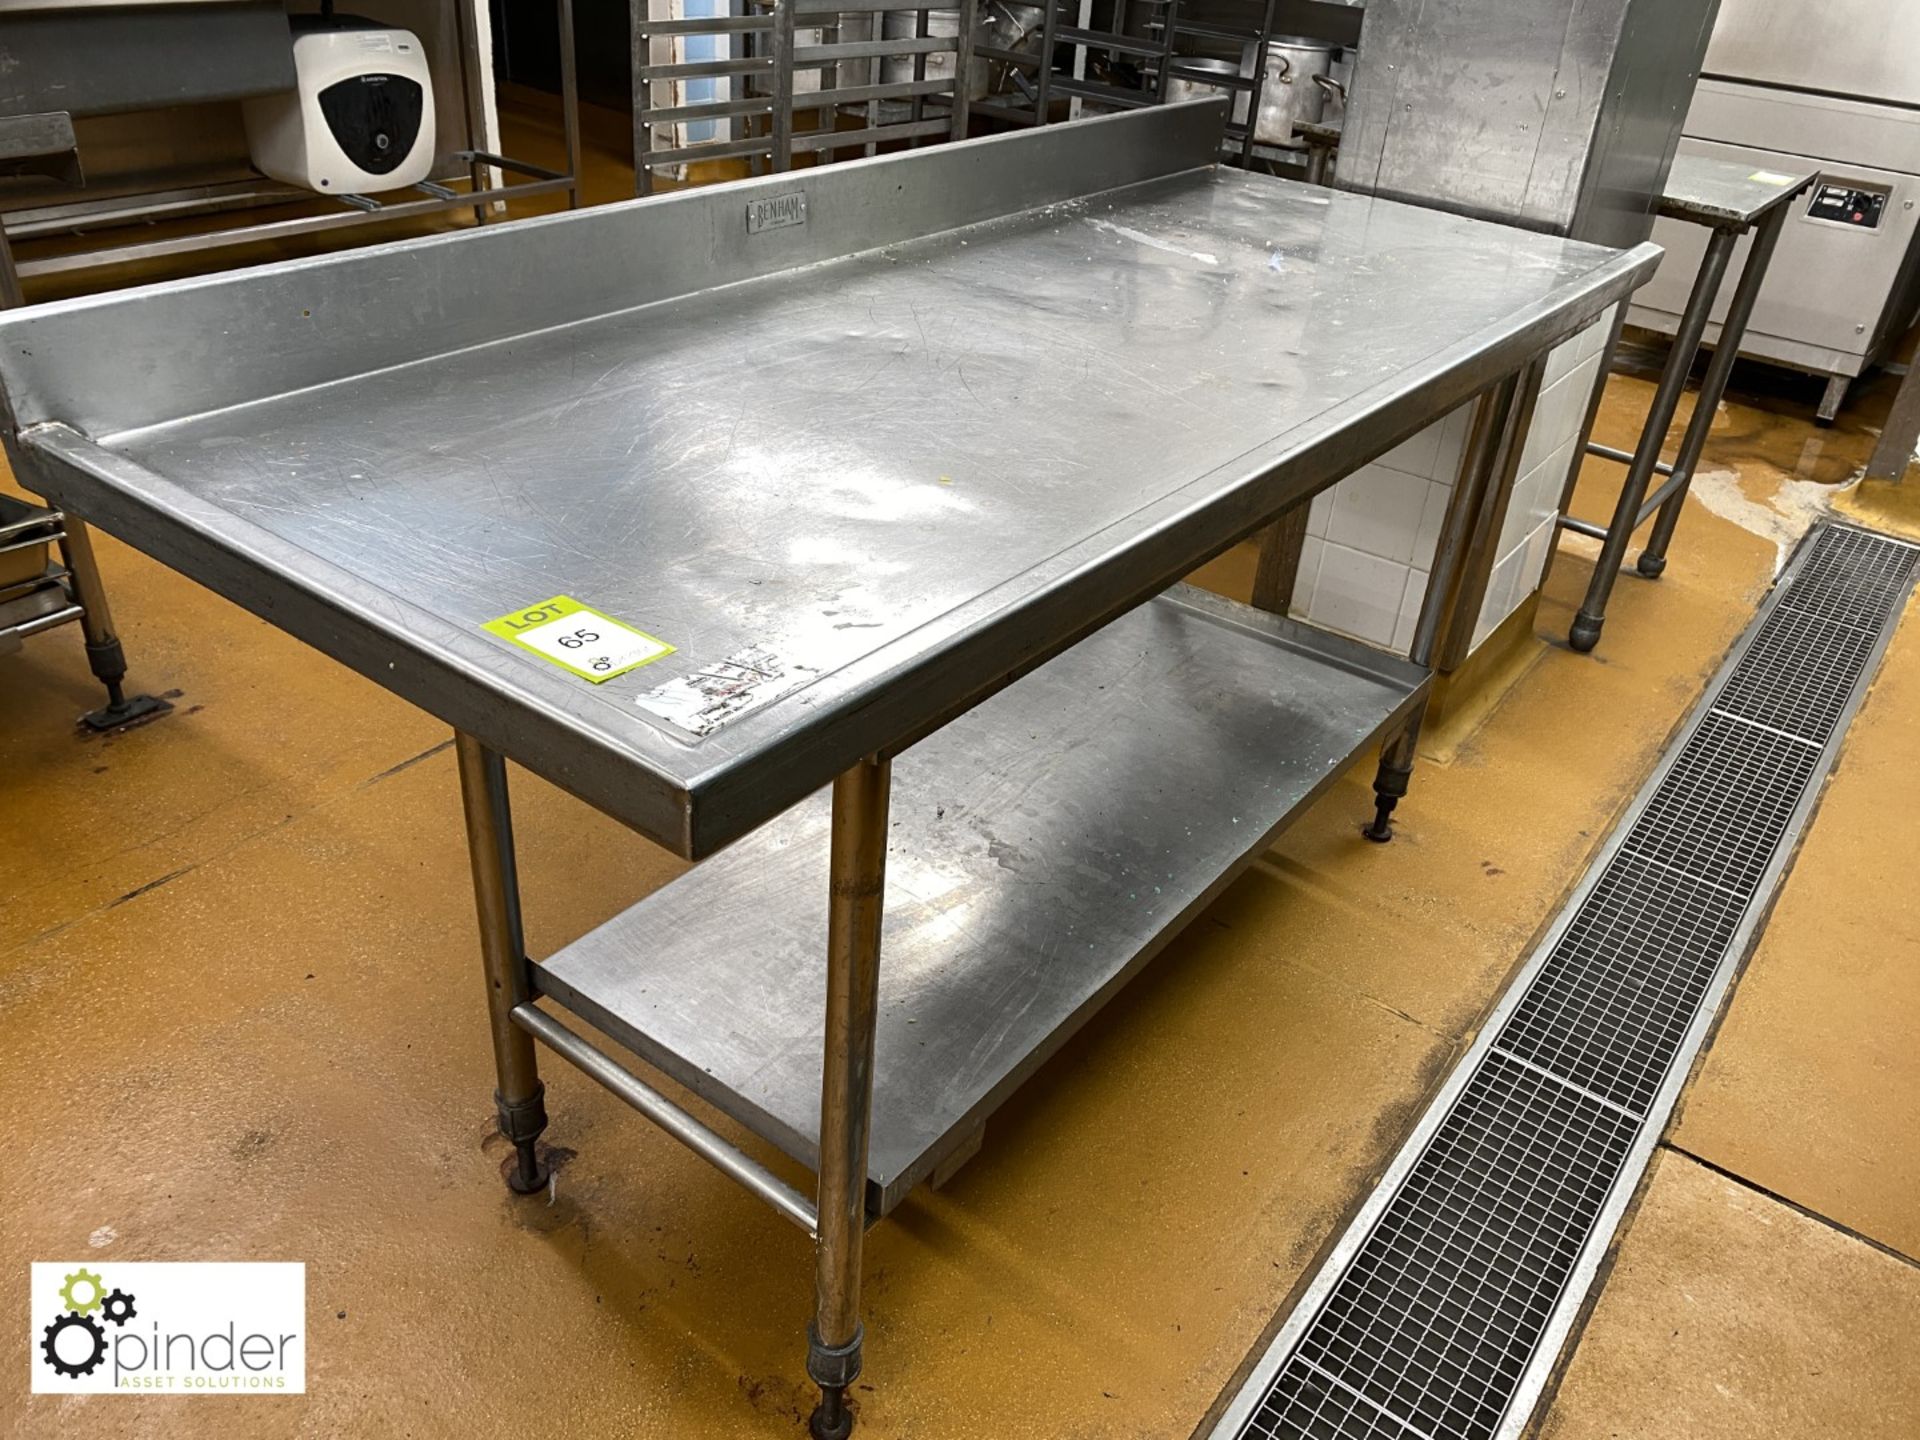 Benham stainless steel Table, 1840mm x 700mm, with shelf under (located in Pot Wash Room)